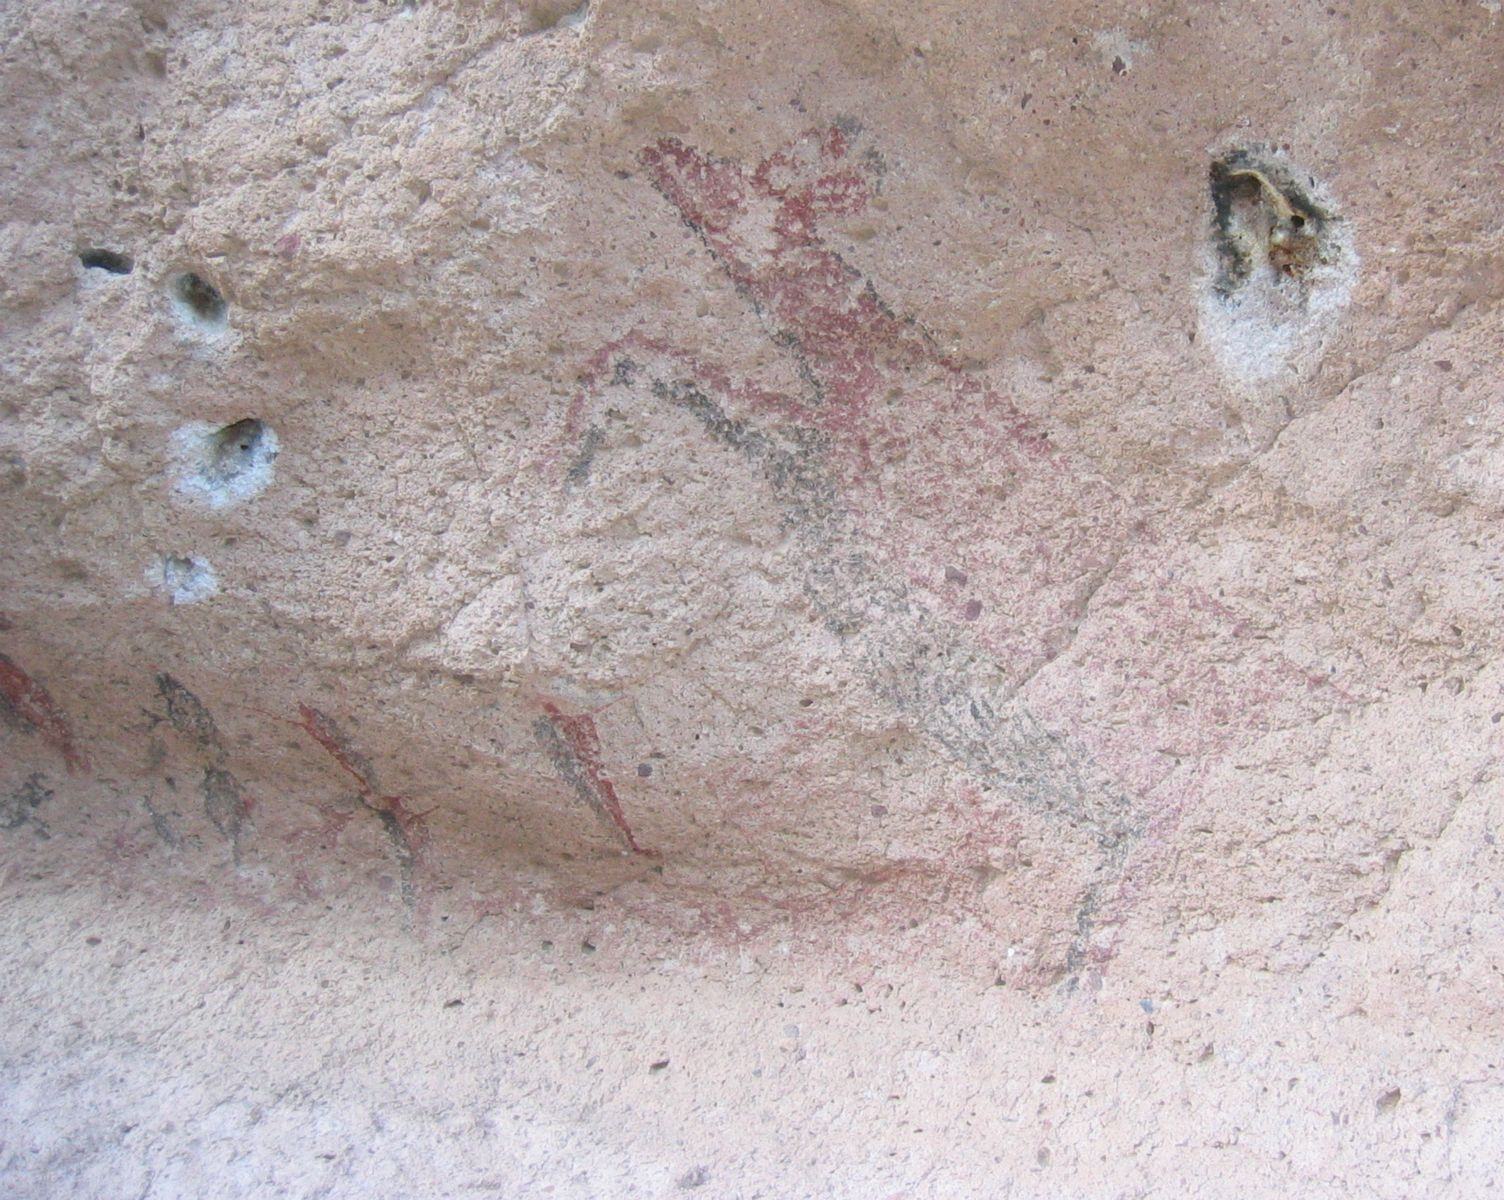 This site is called La Loma Cuevada by Crosby.  This is the main panel.  Eve has remarked that big deer facing left are very common at small sites in this area.